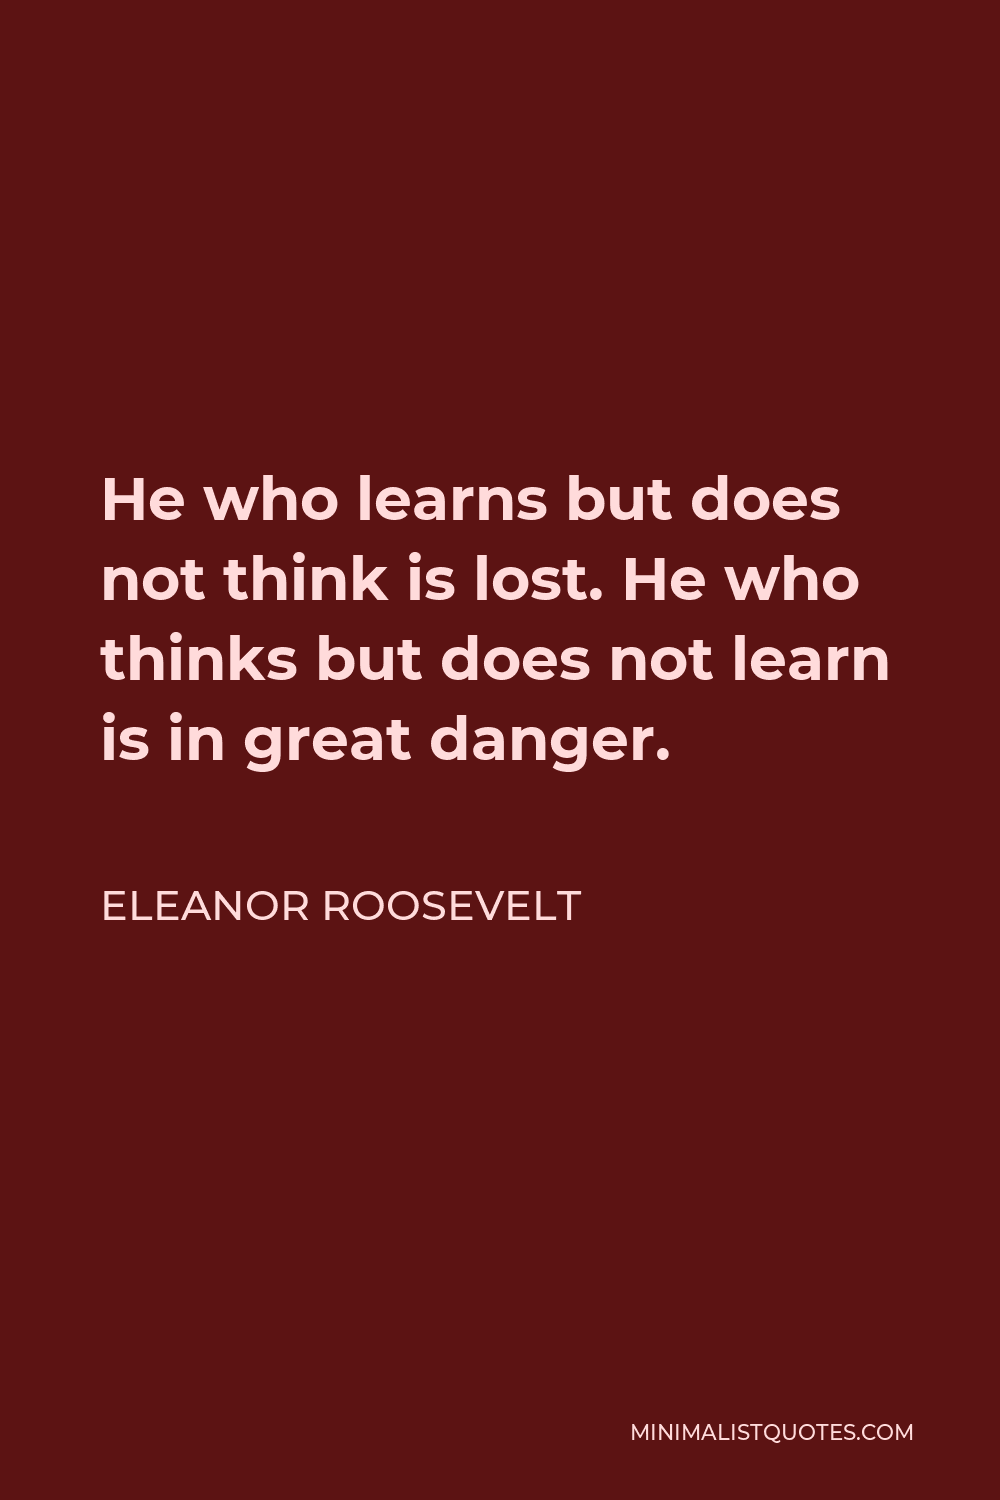 Eleanor Roosevelt Quote: He who learns but does not think is lost. He ...